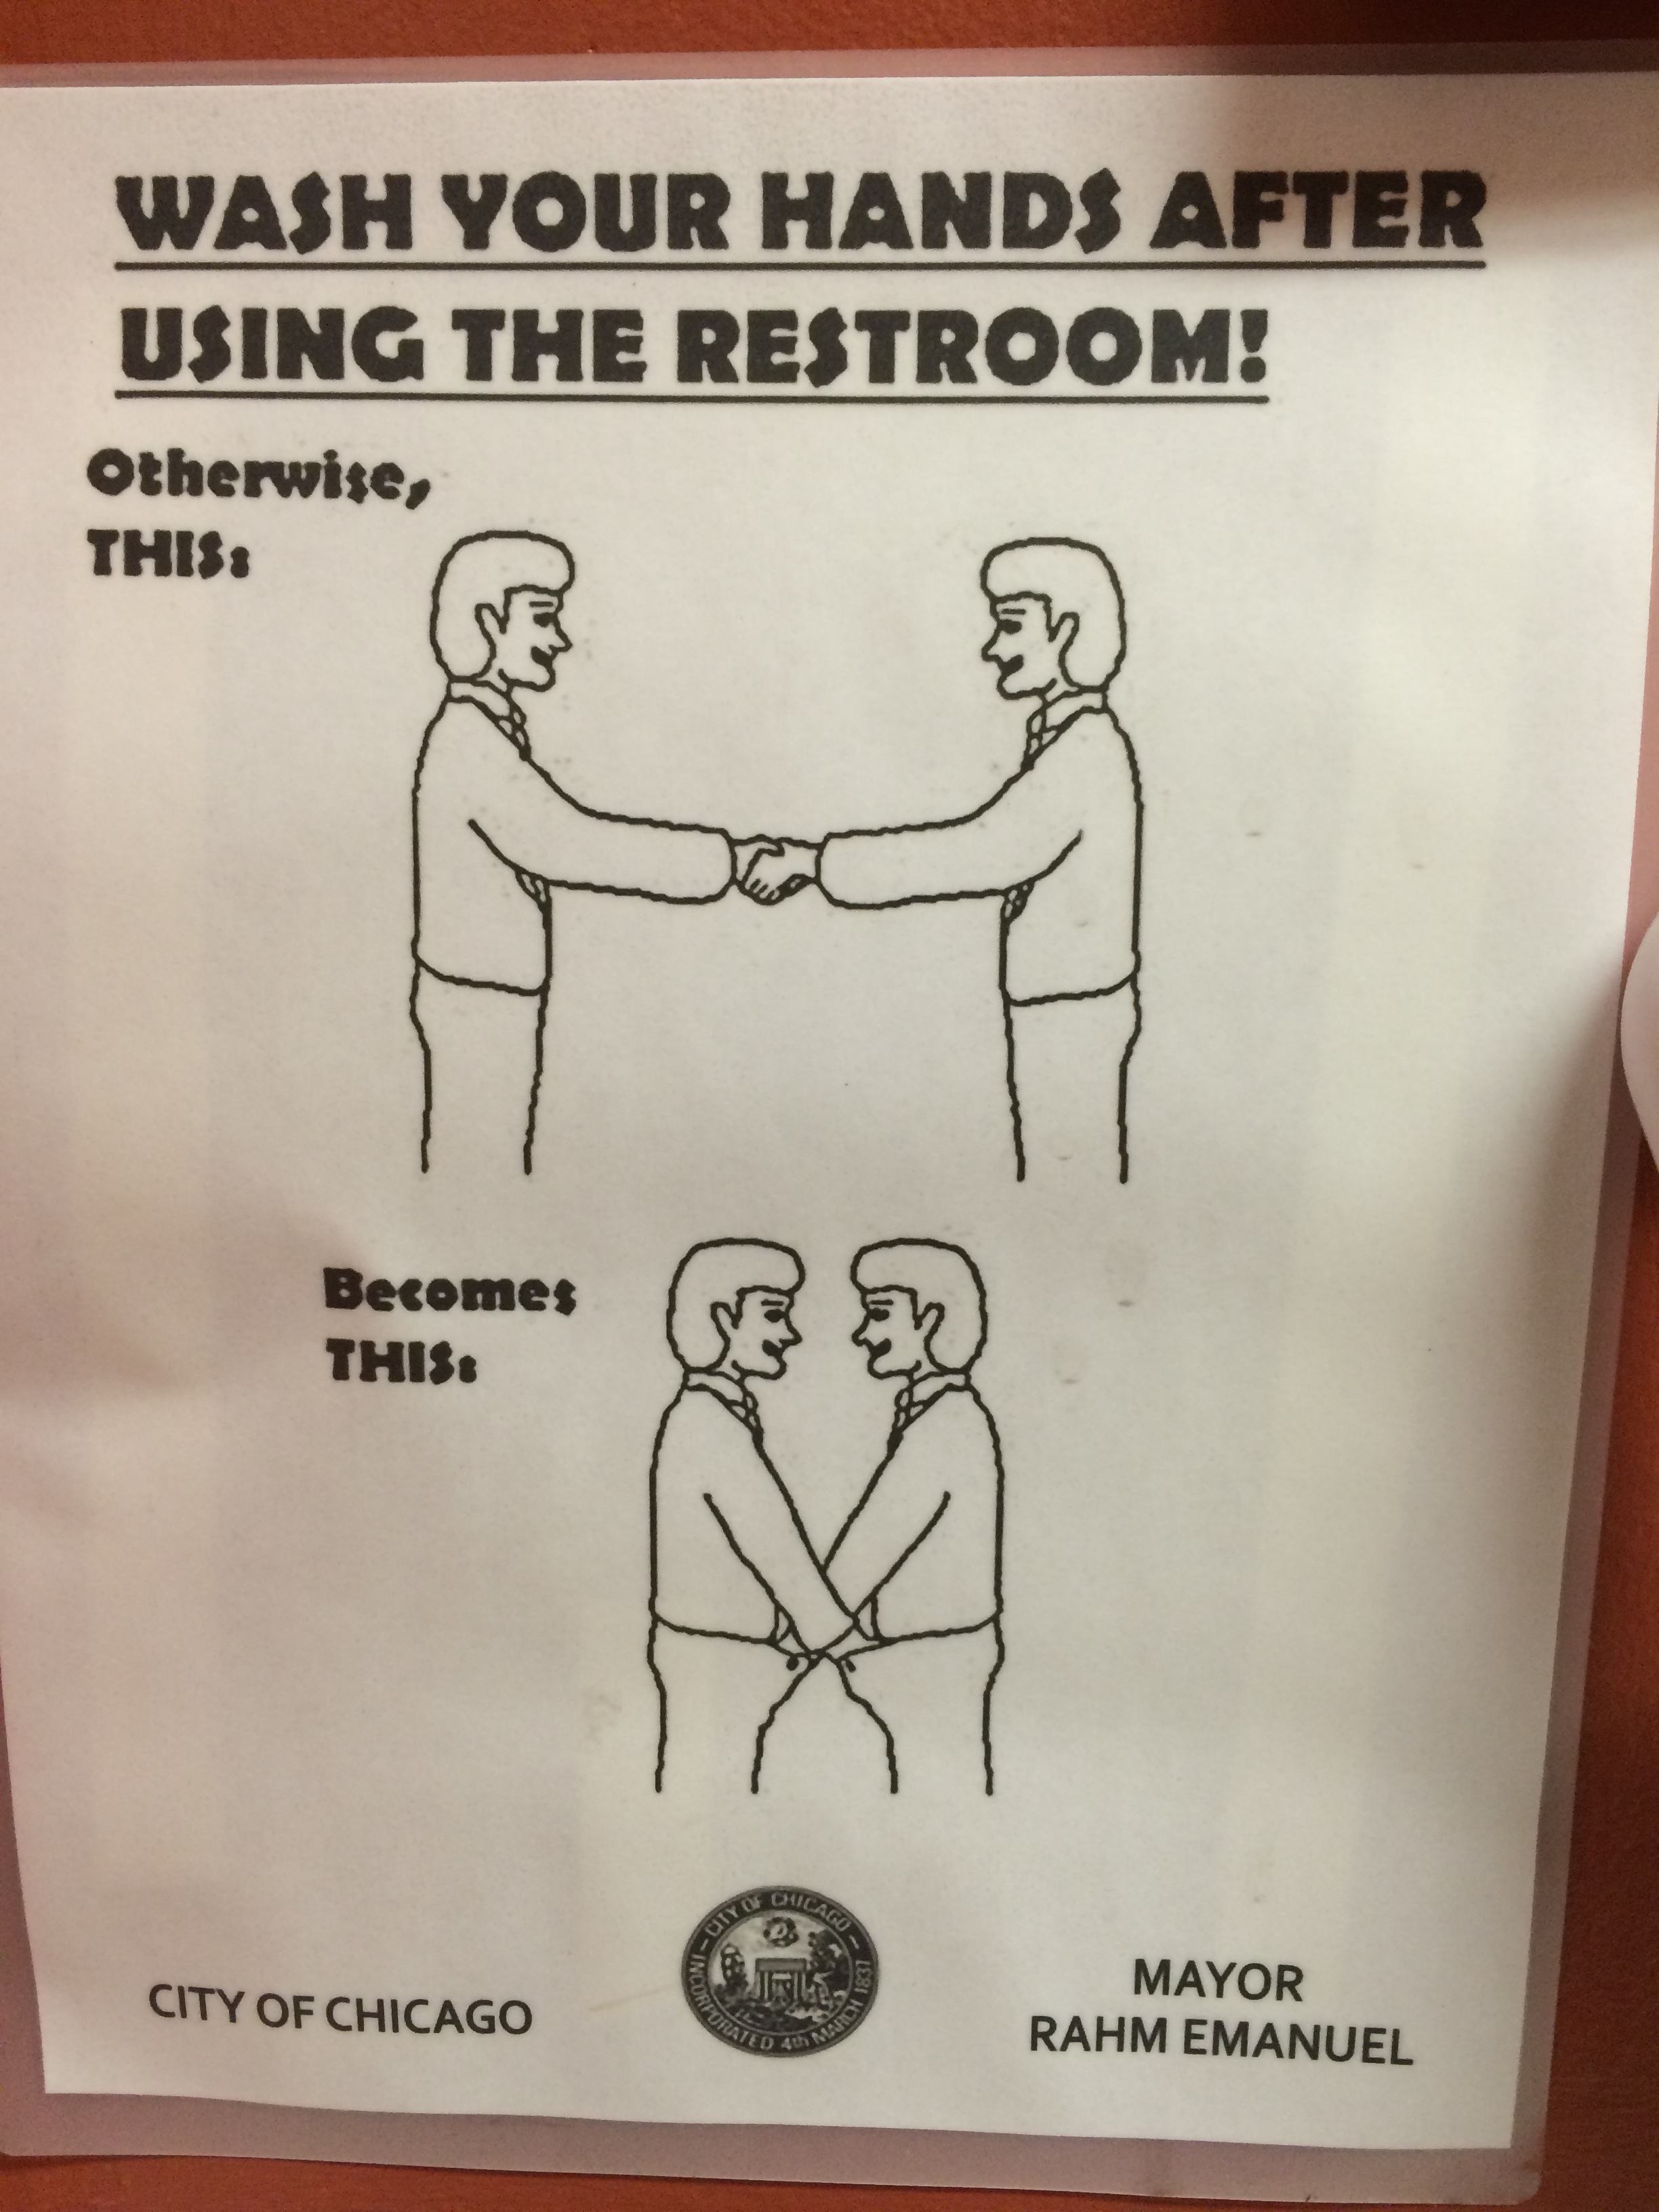 Wash your hands after using the restroom!